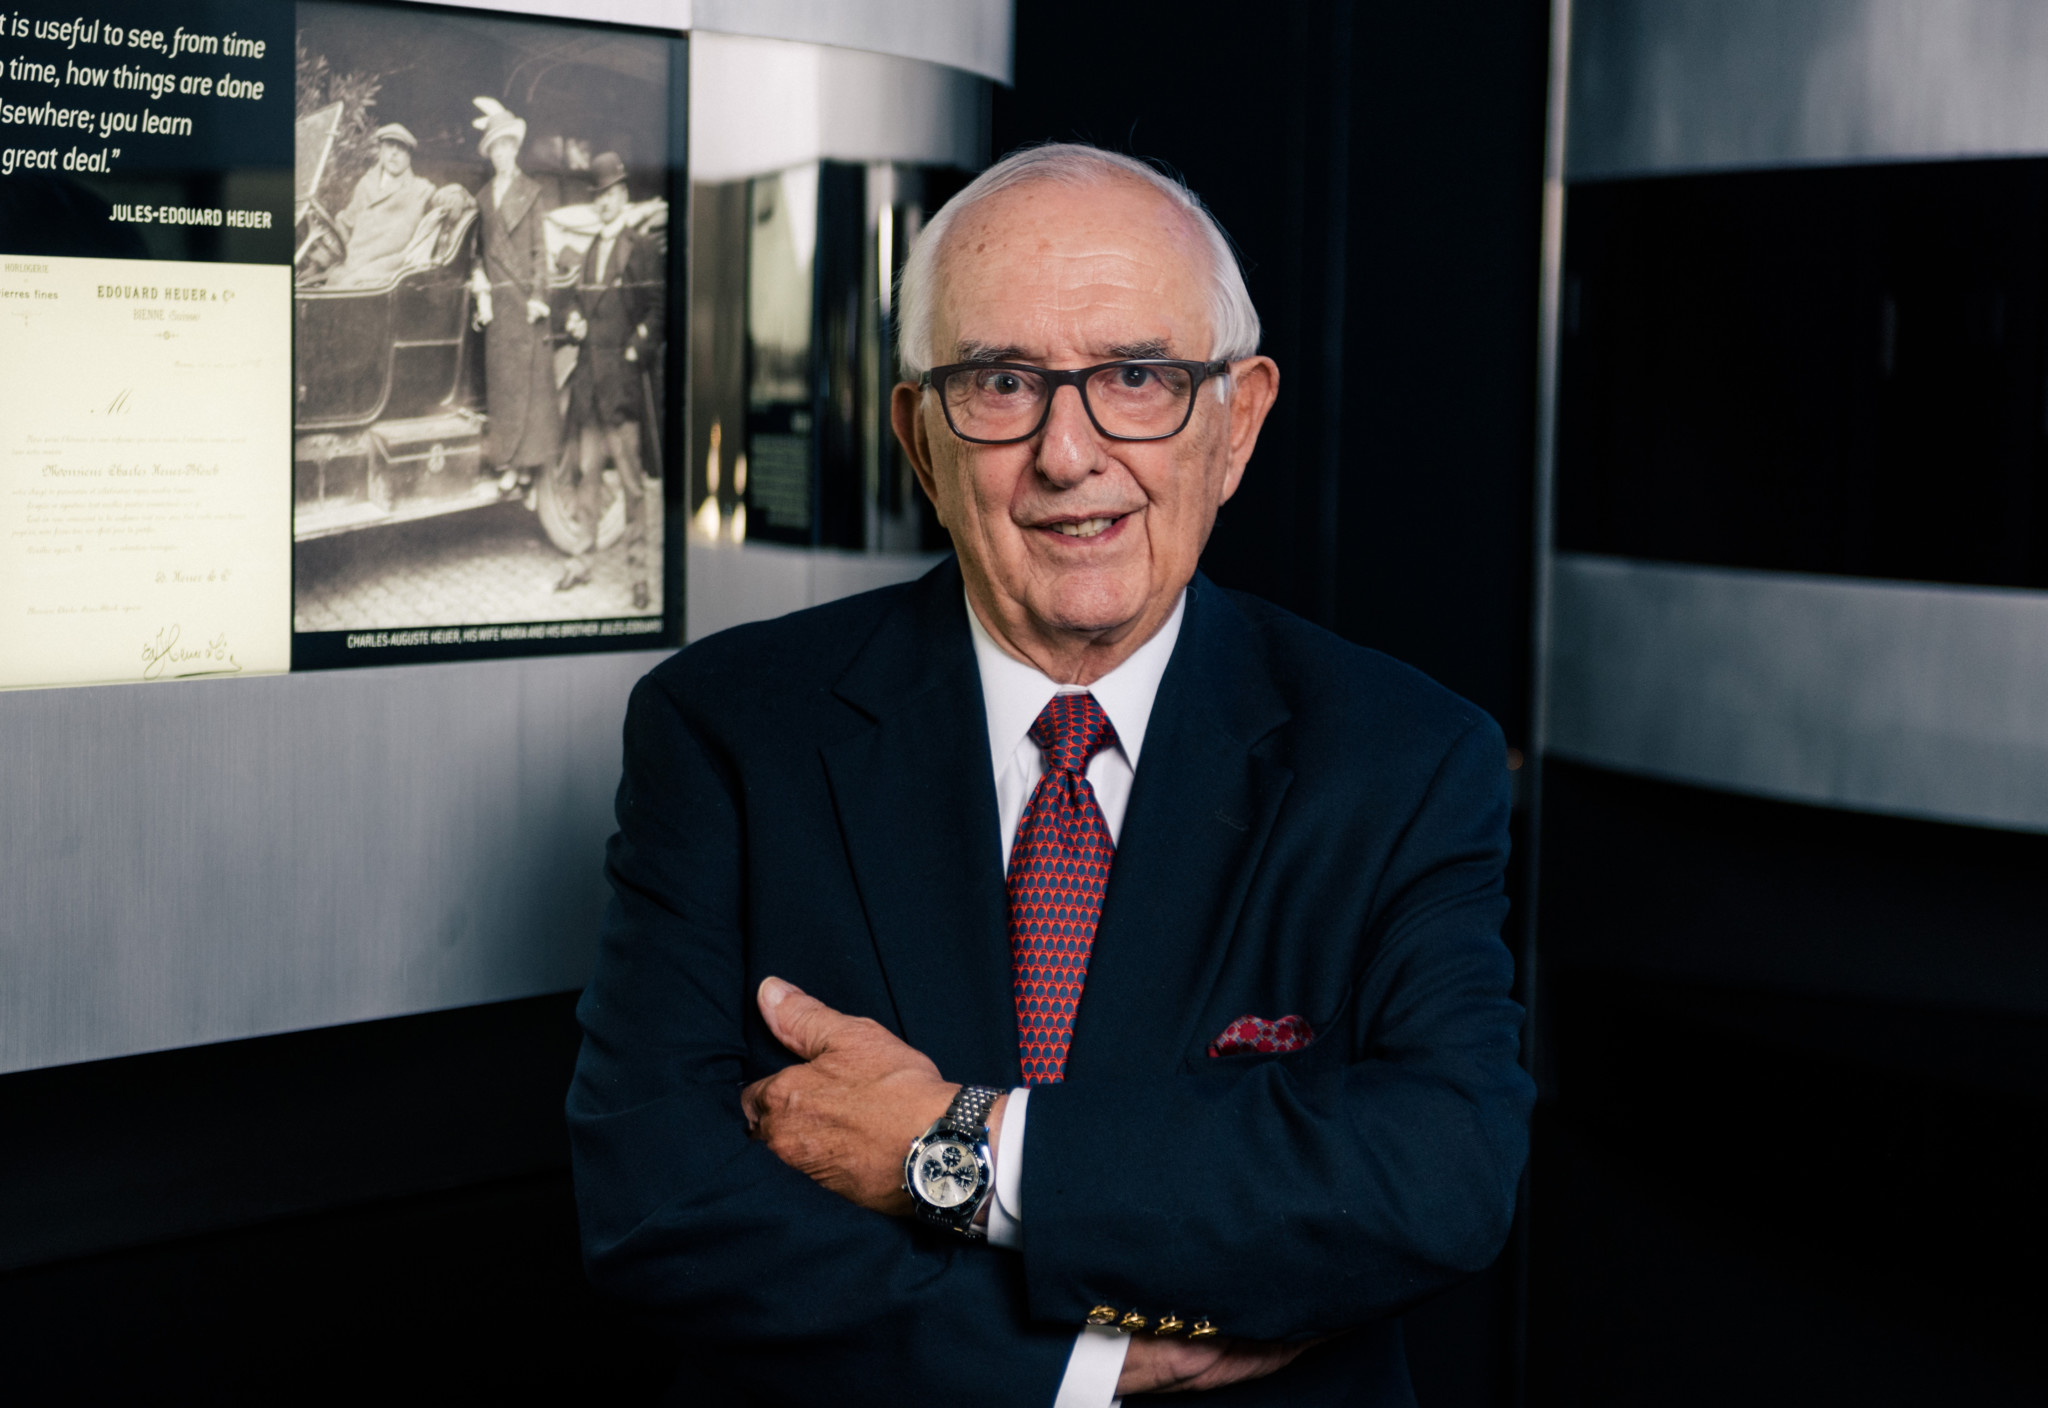 Jack heuer from tag heuer